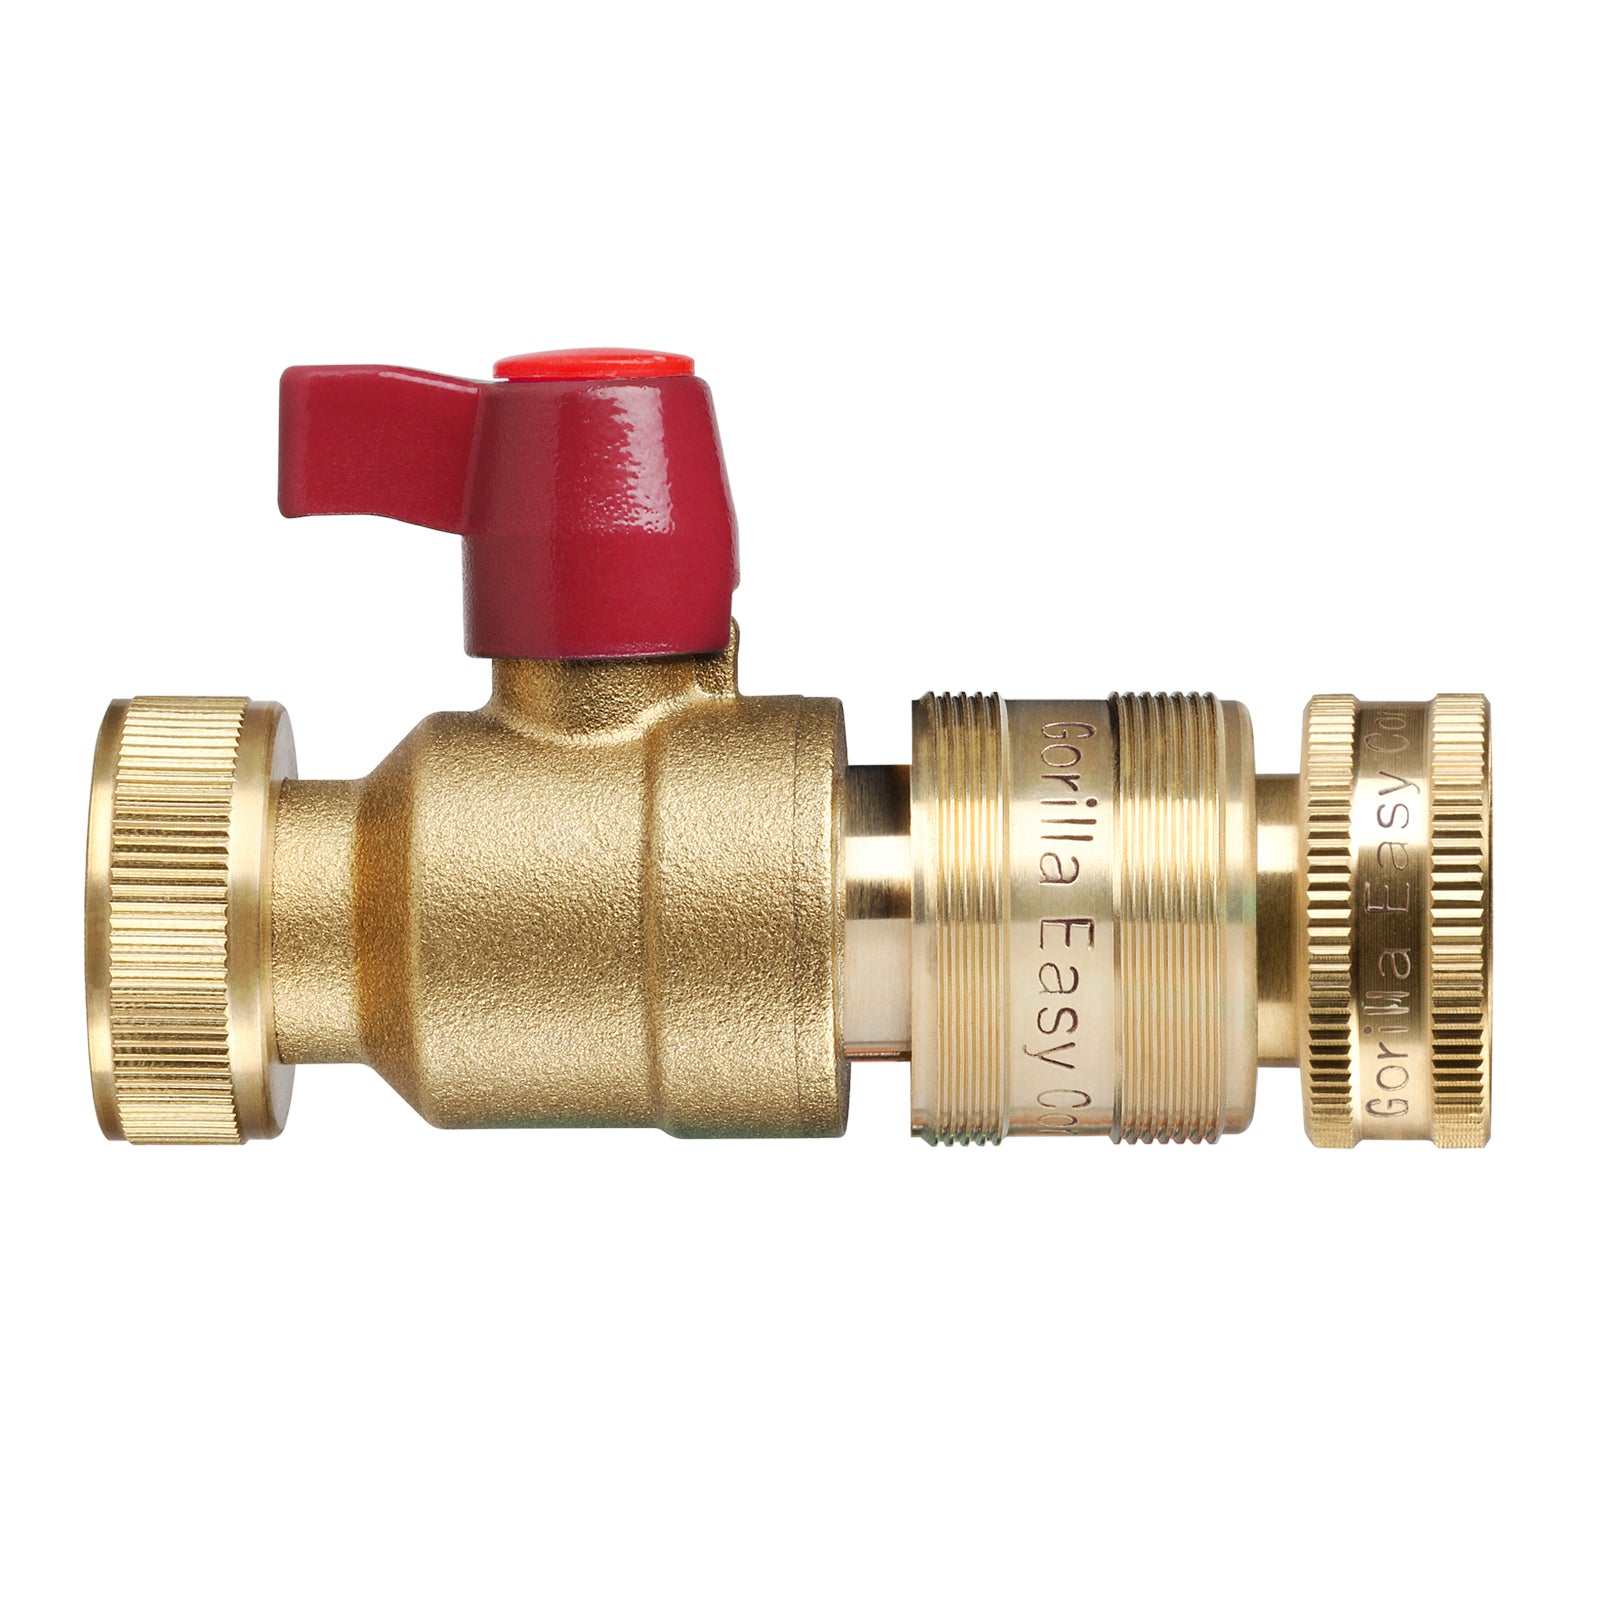 GORILLA EASY CONNECT Solid Brass Integrated Female Shut-Off Valve